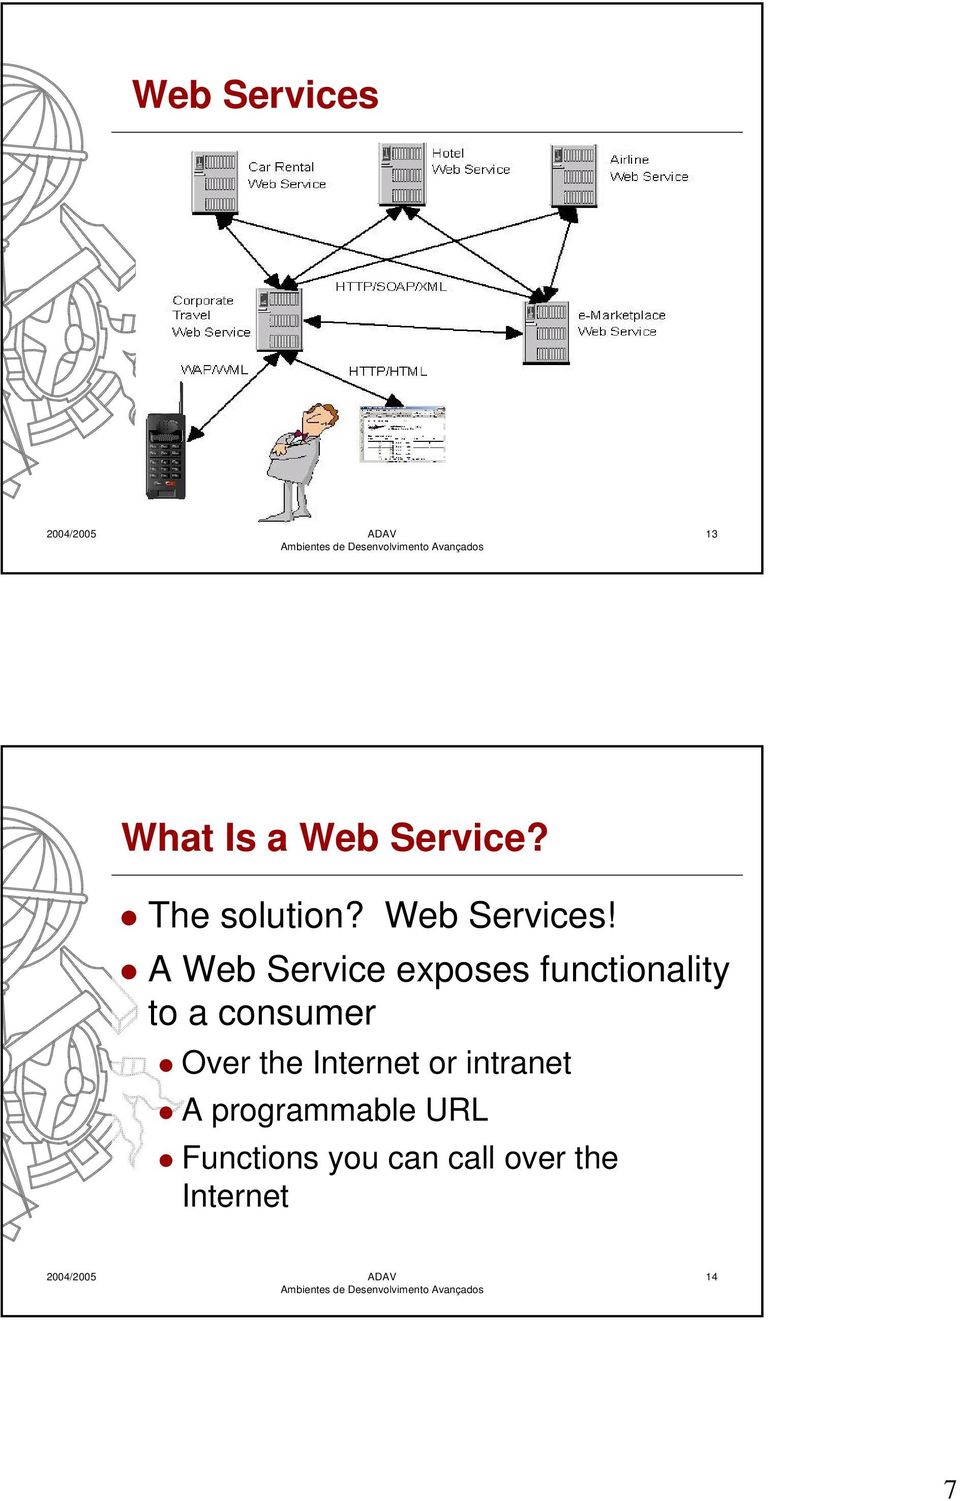 A Web Service exposes functionality to a consumer